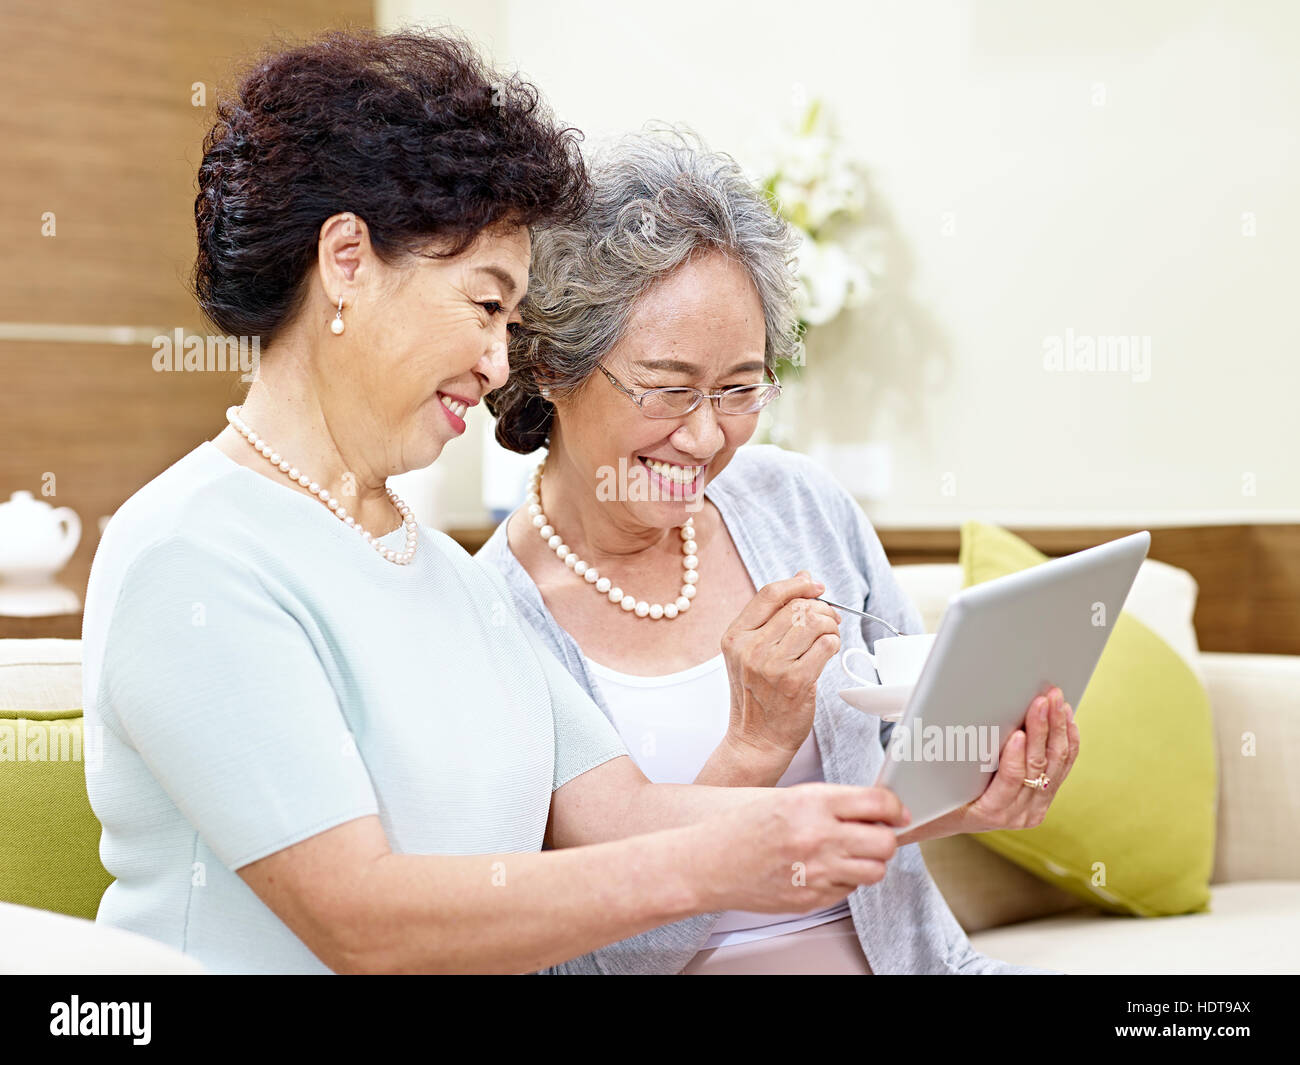 side view of two senior asian women sitting on couch taking a selfie using mobile phone, happy and smiling Stock Photo